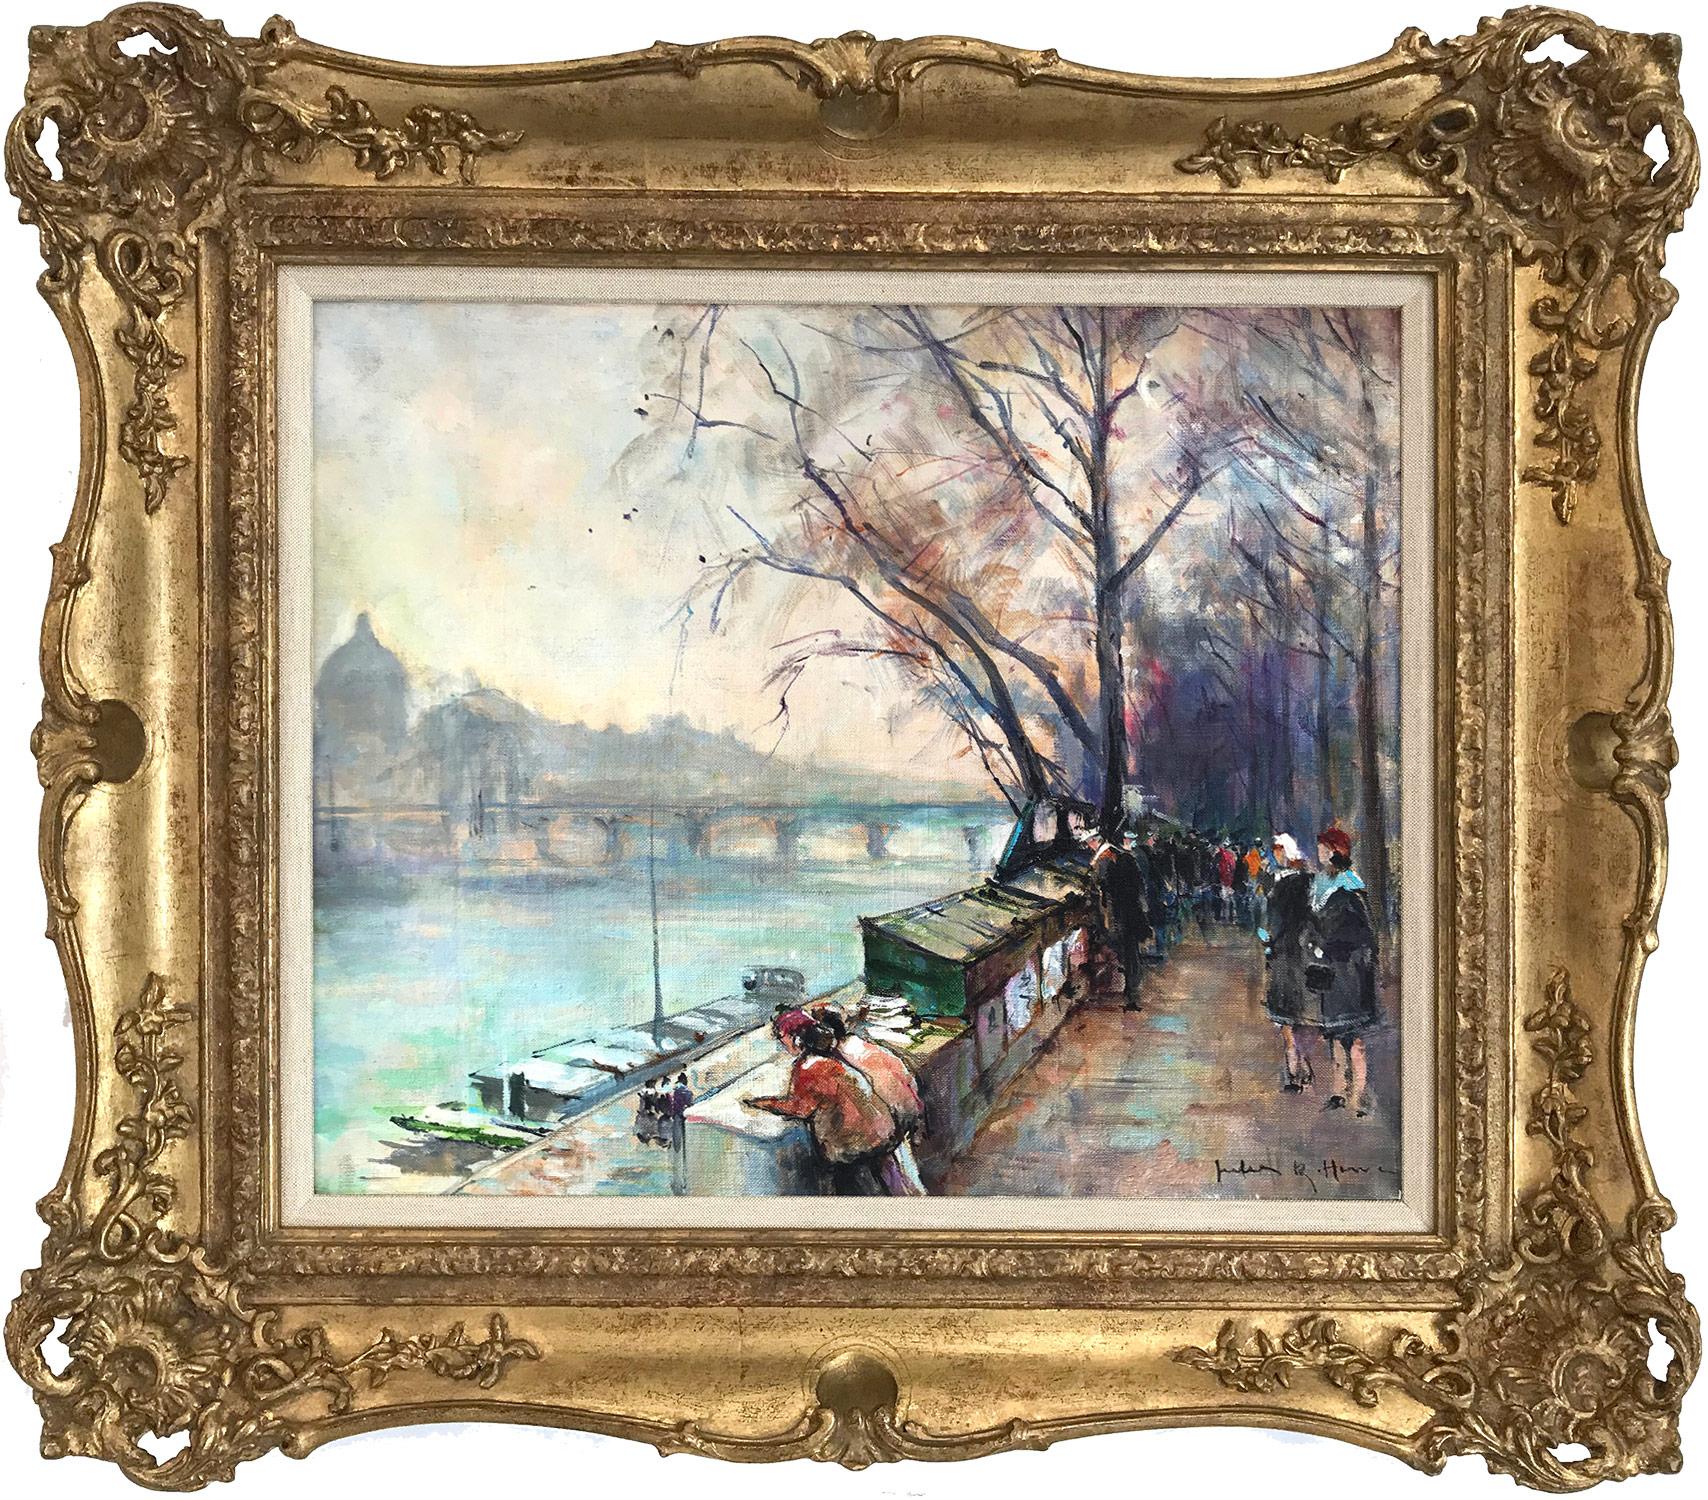 "An Afternoon Along the Seine, Paris" Impressionist Oil Painting on Canvas